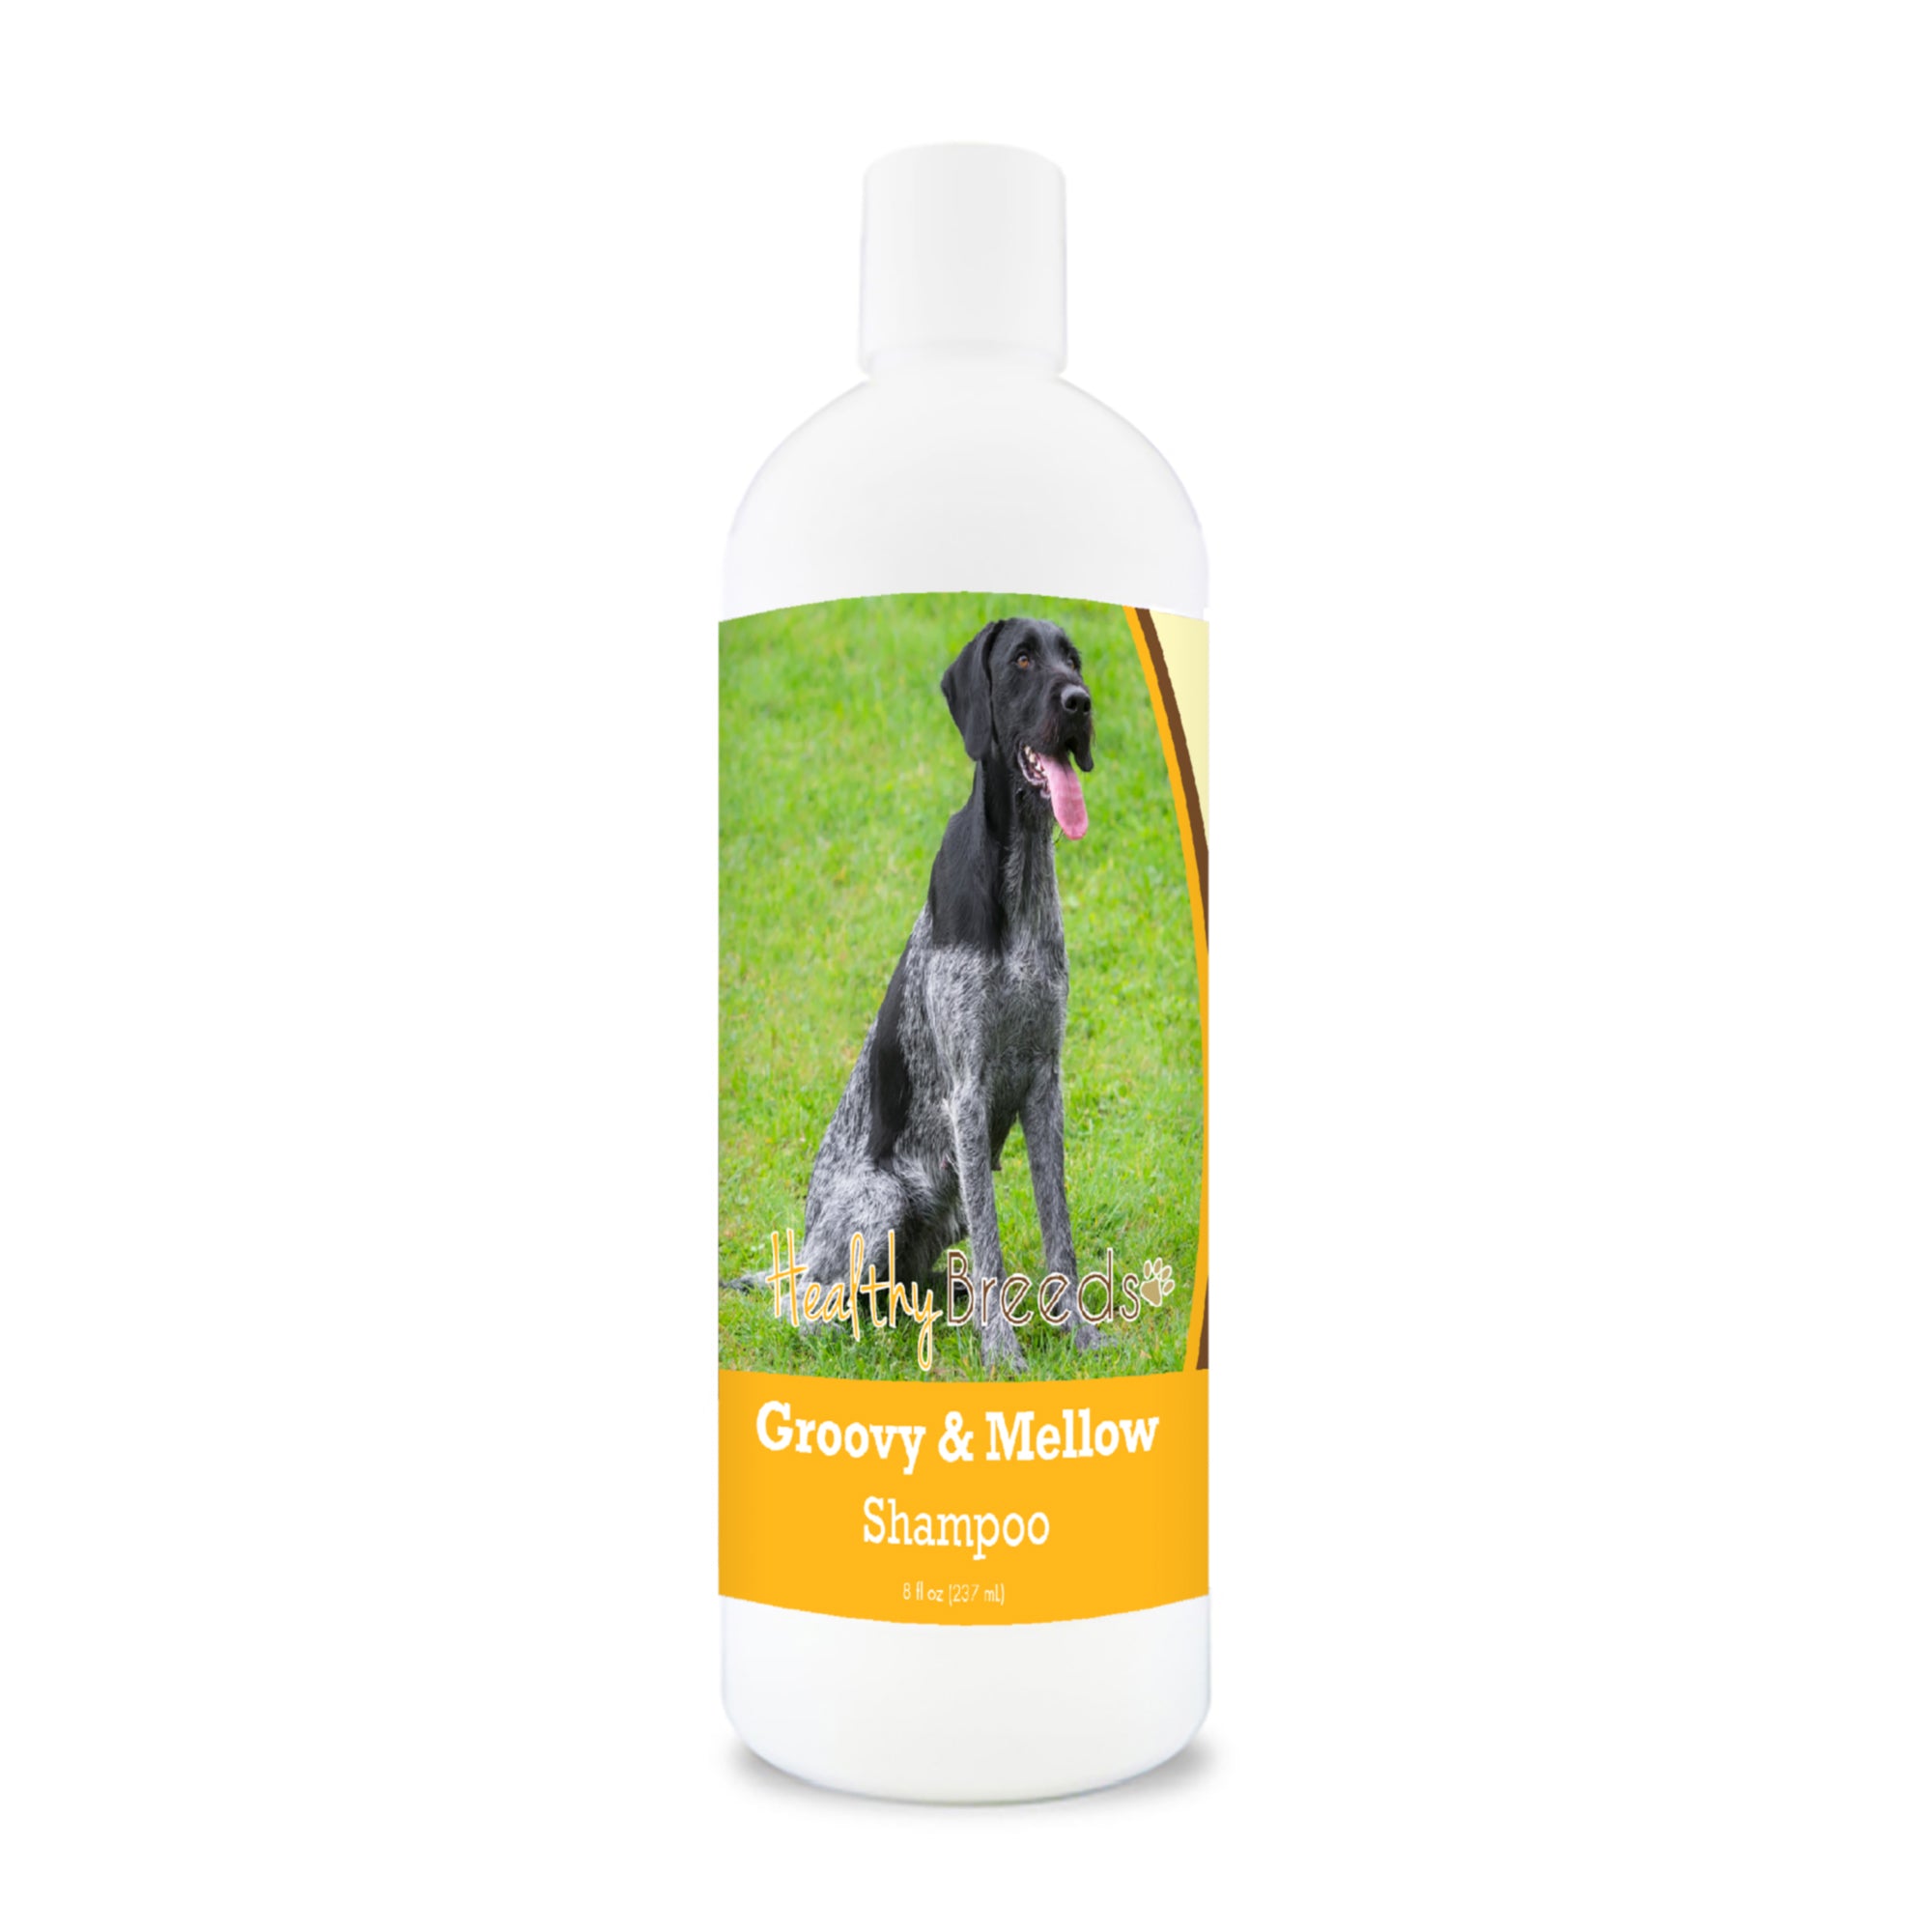 German Wirehaired Pointer Groovy & Mellow Shampoo 8 oz